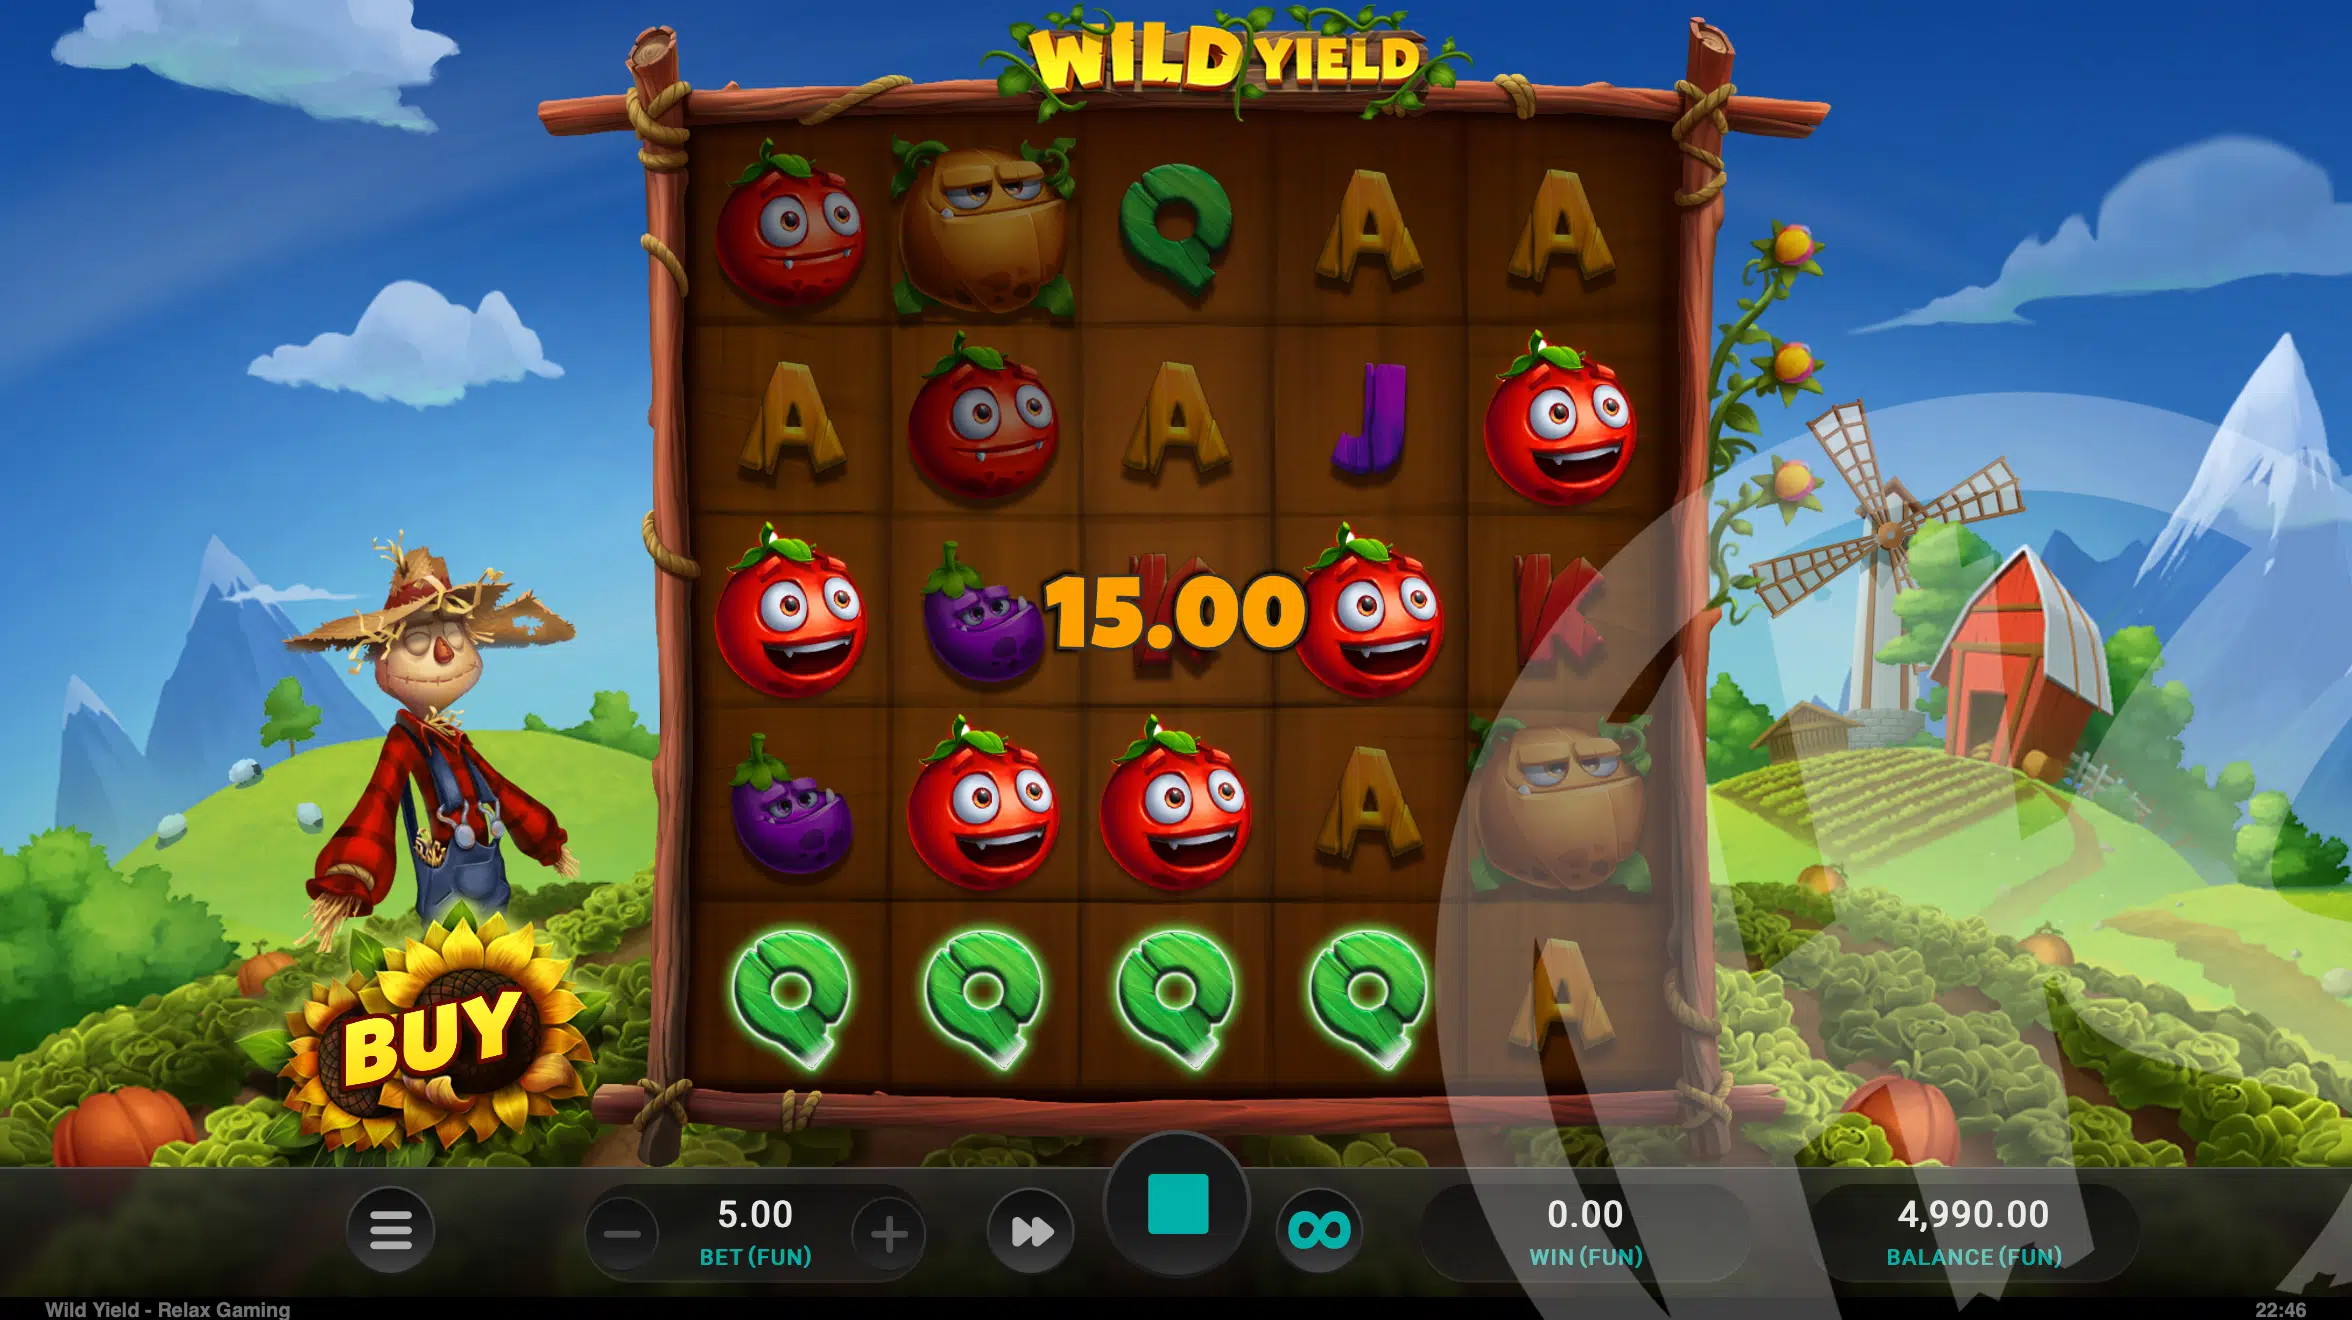 Wild Yield Offers Players 259 Connected Ways to Win